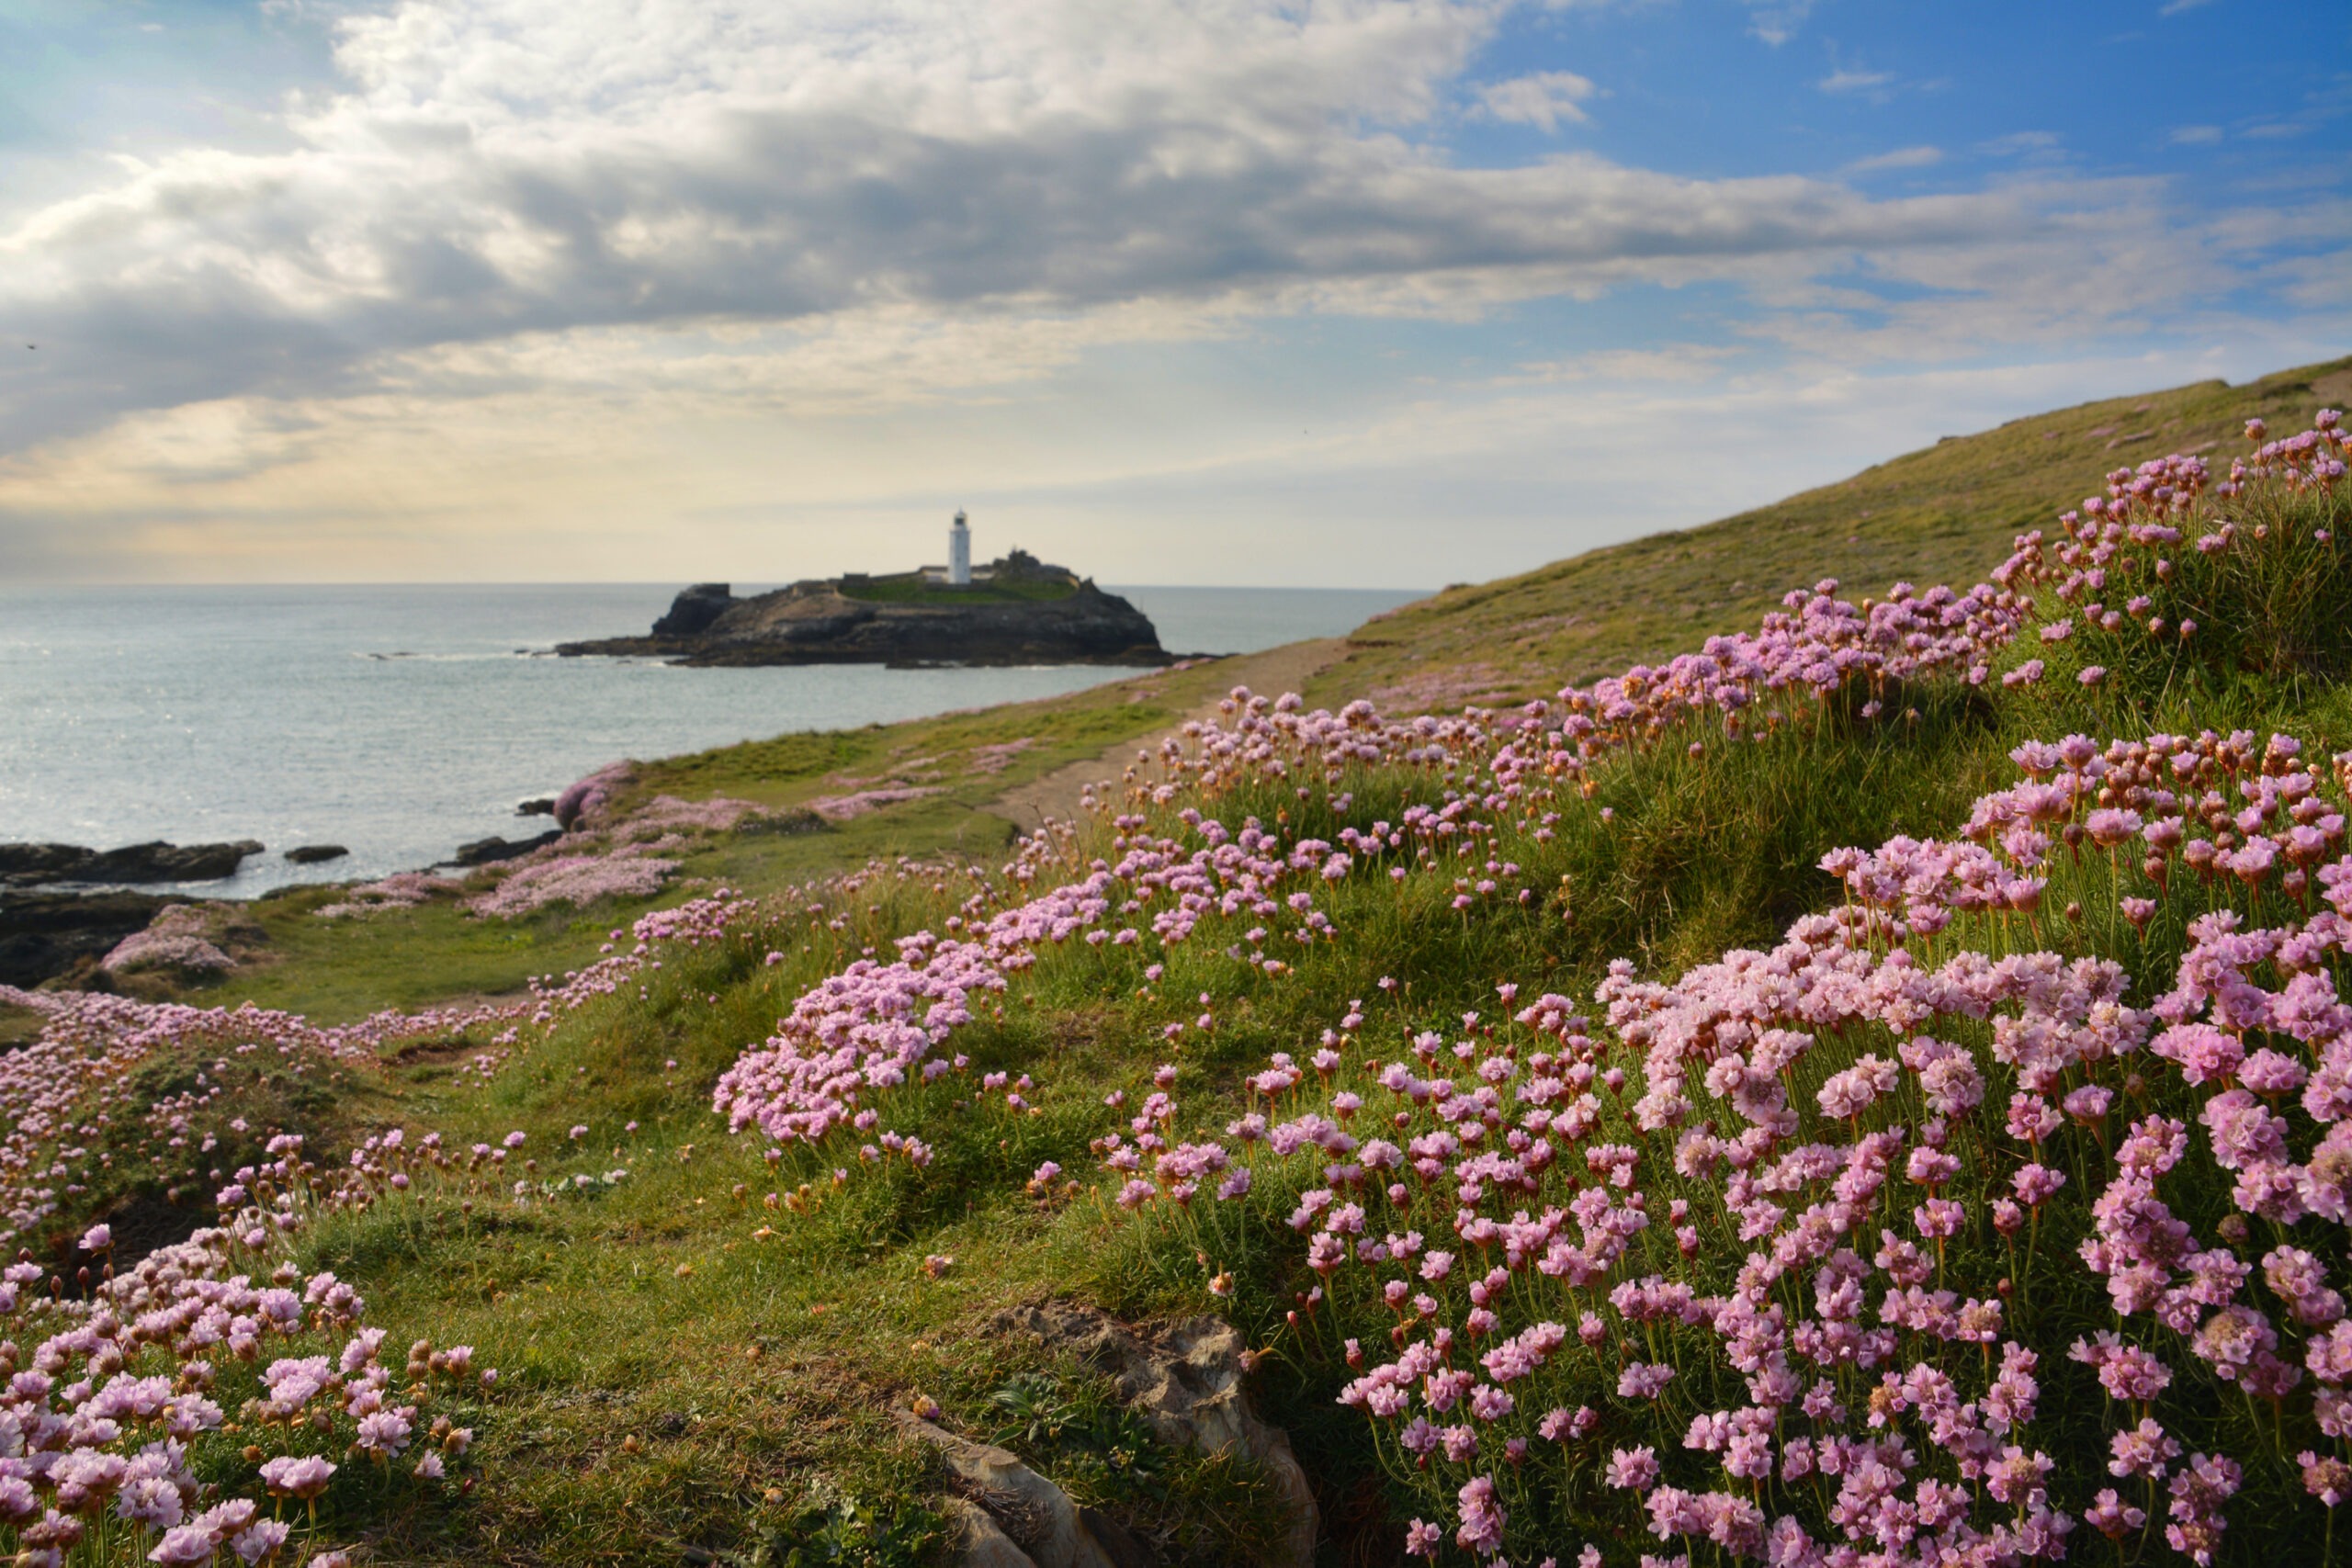 https://cornwall-landscape.org/wp-content/uploads/2023/10/Section-6-Godrevy-to-Portreath-48-Mary-Poad-Thrift-covered-cliffs-at-Godrevy-scaled.jpg